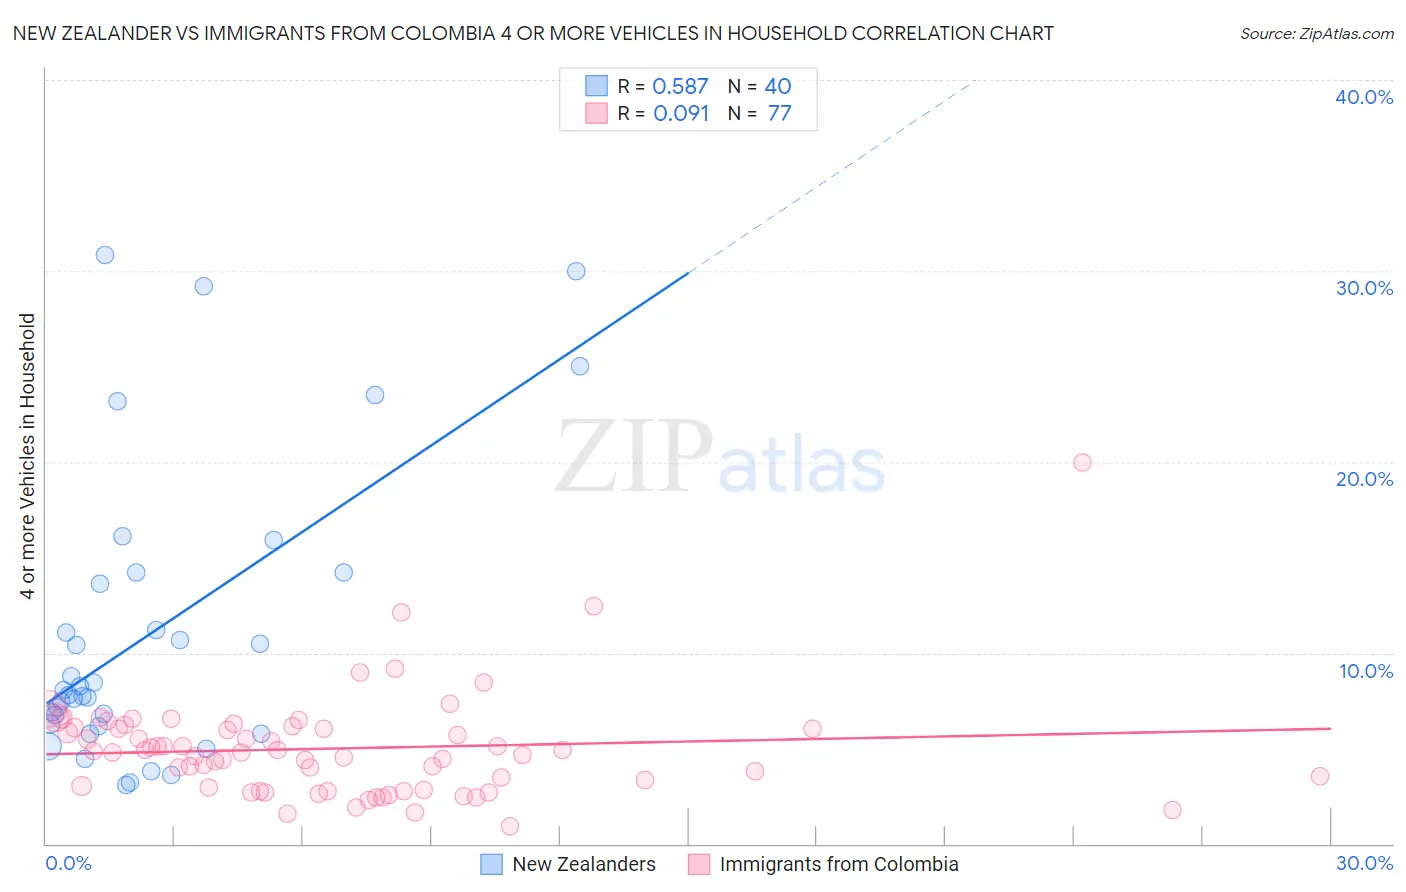 New Zealander vs Immigrants from Colombia 4 or more Vehicles in Household